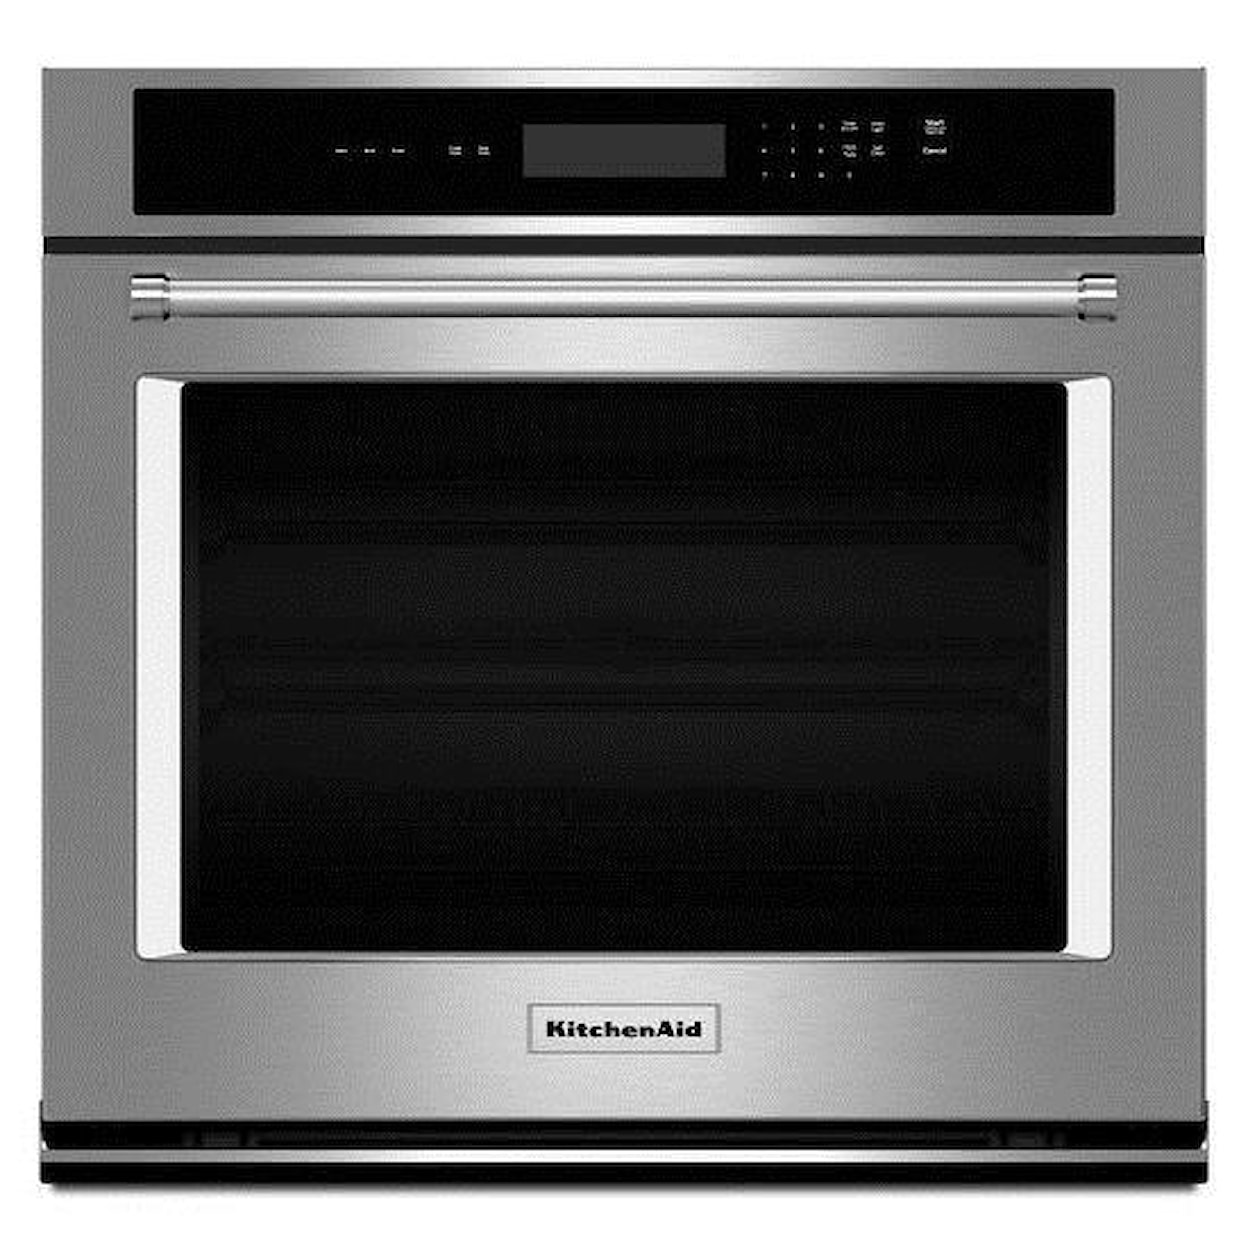 KitchenAid Built-In Electric Single Oven 30" 5 cu. ft. Single Wall Oven